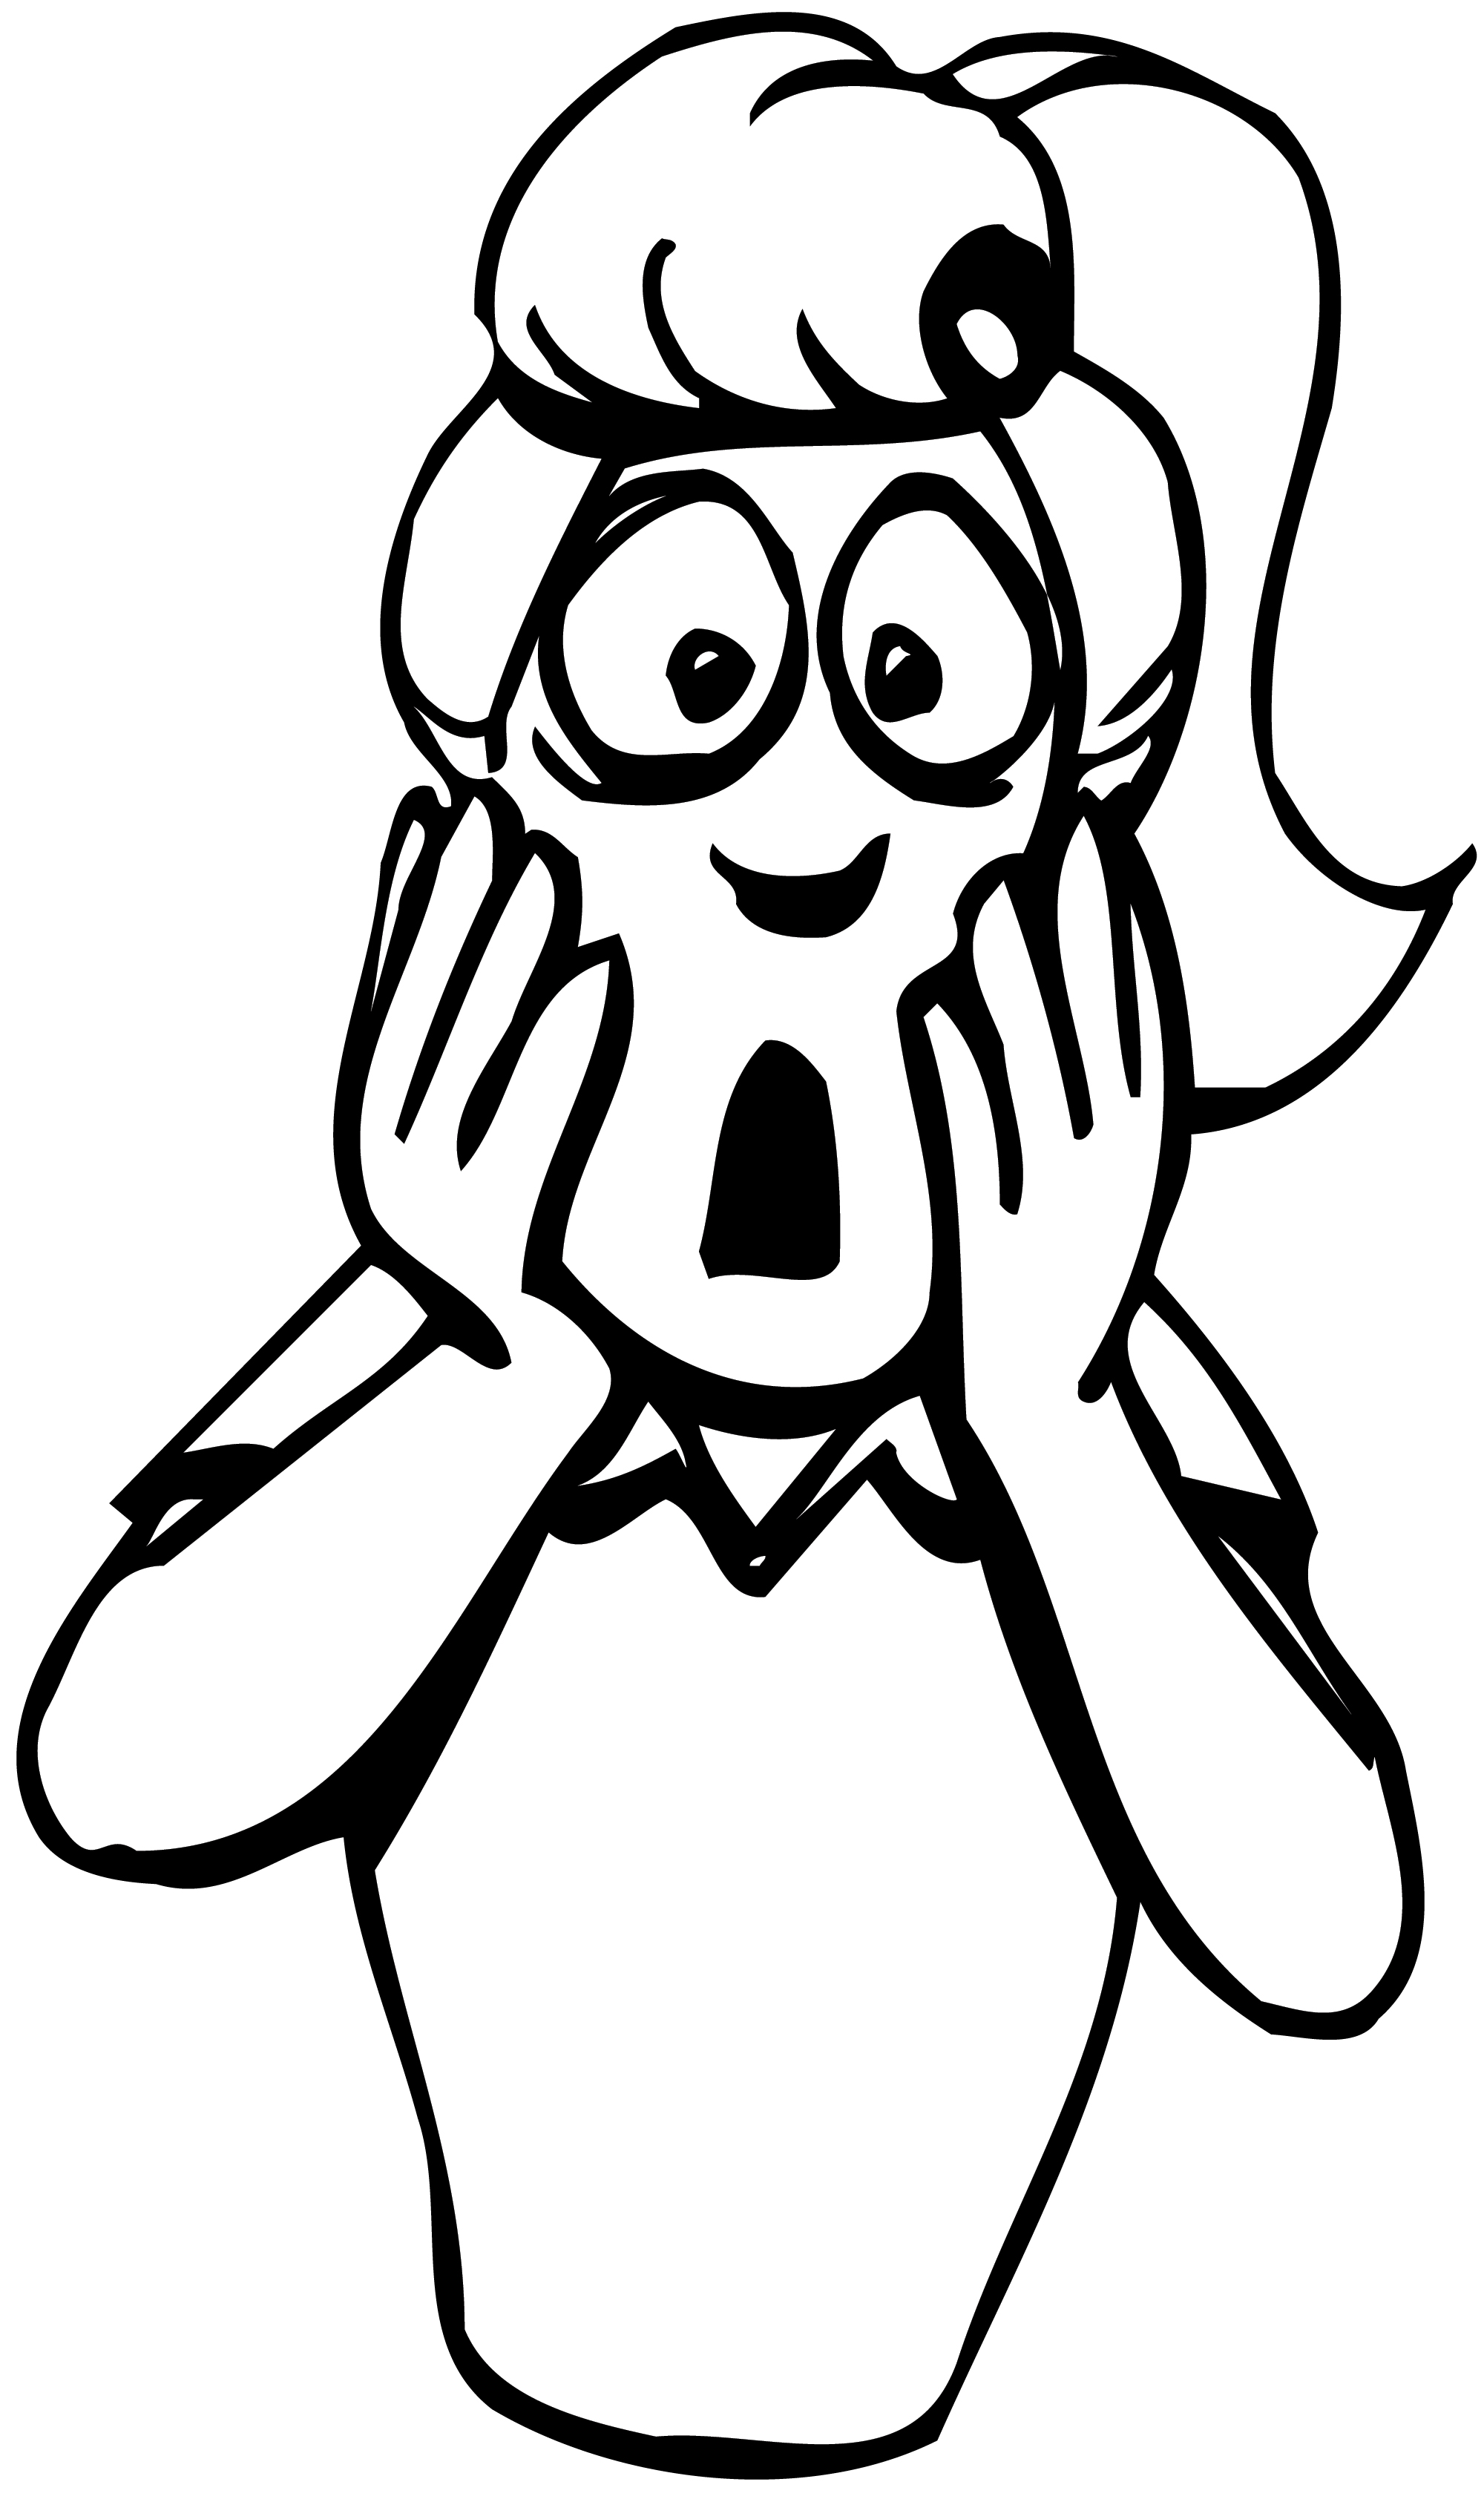 Shocked Face Clip Art. Free Clipart Images